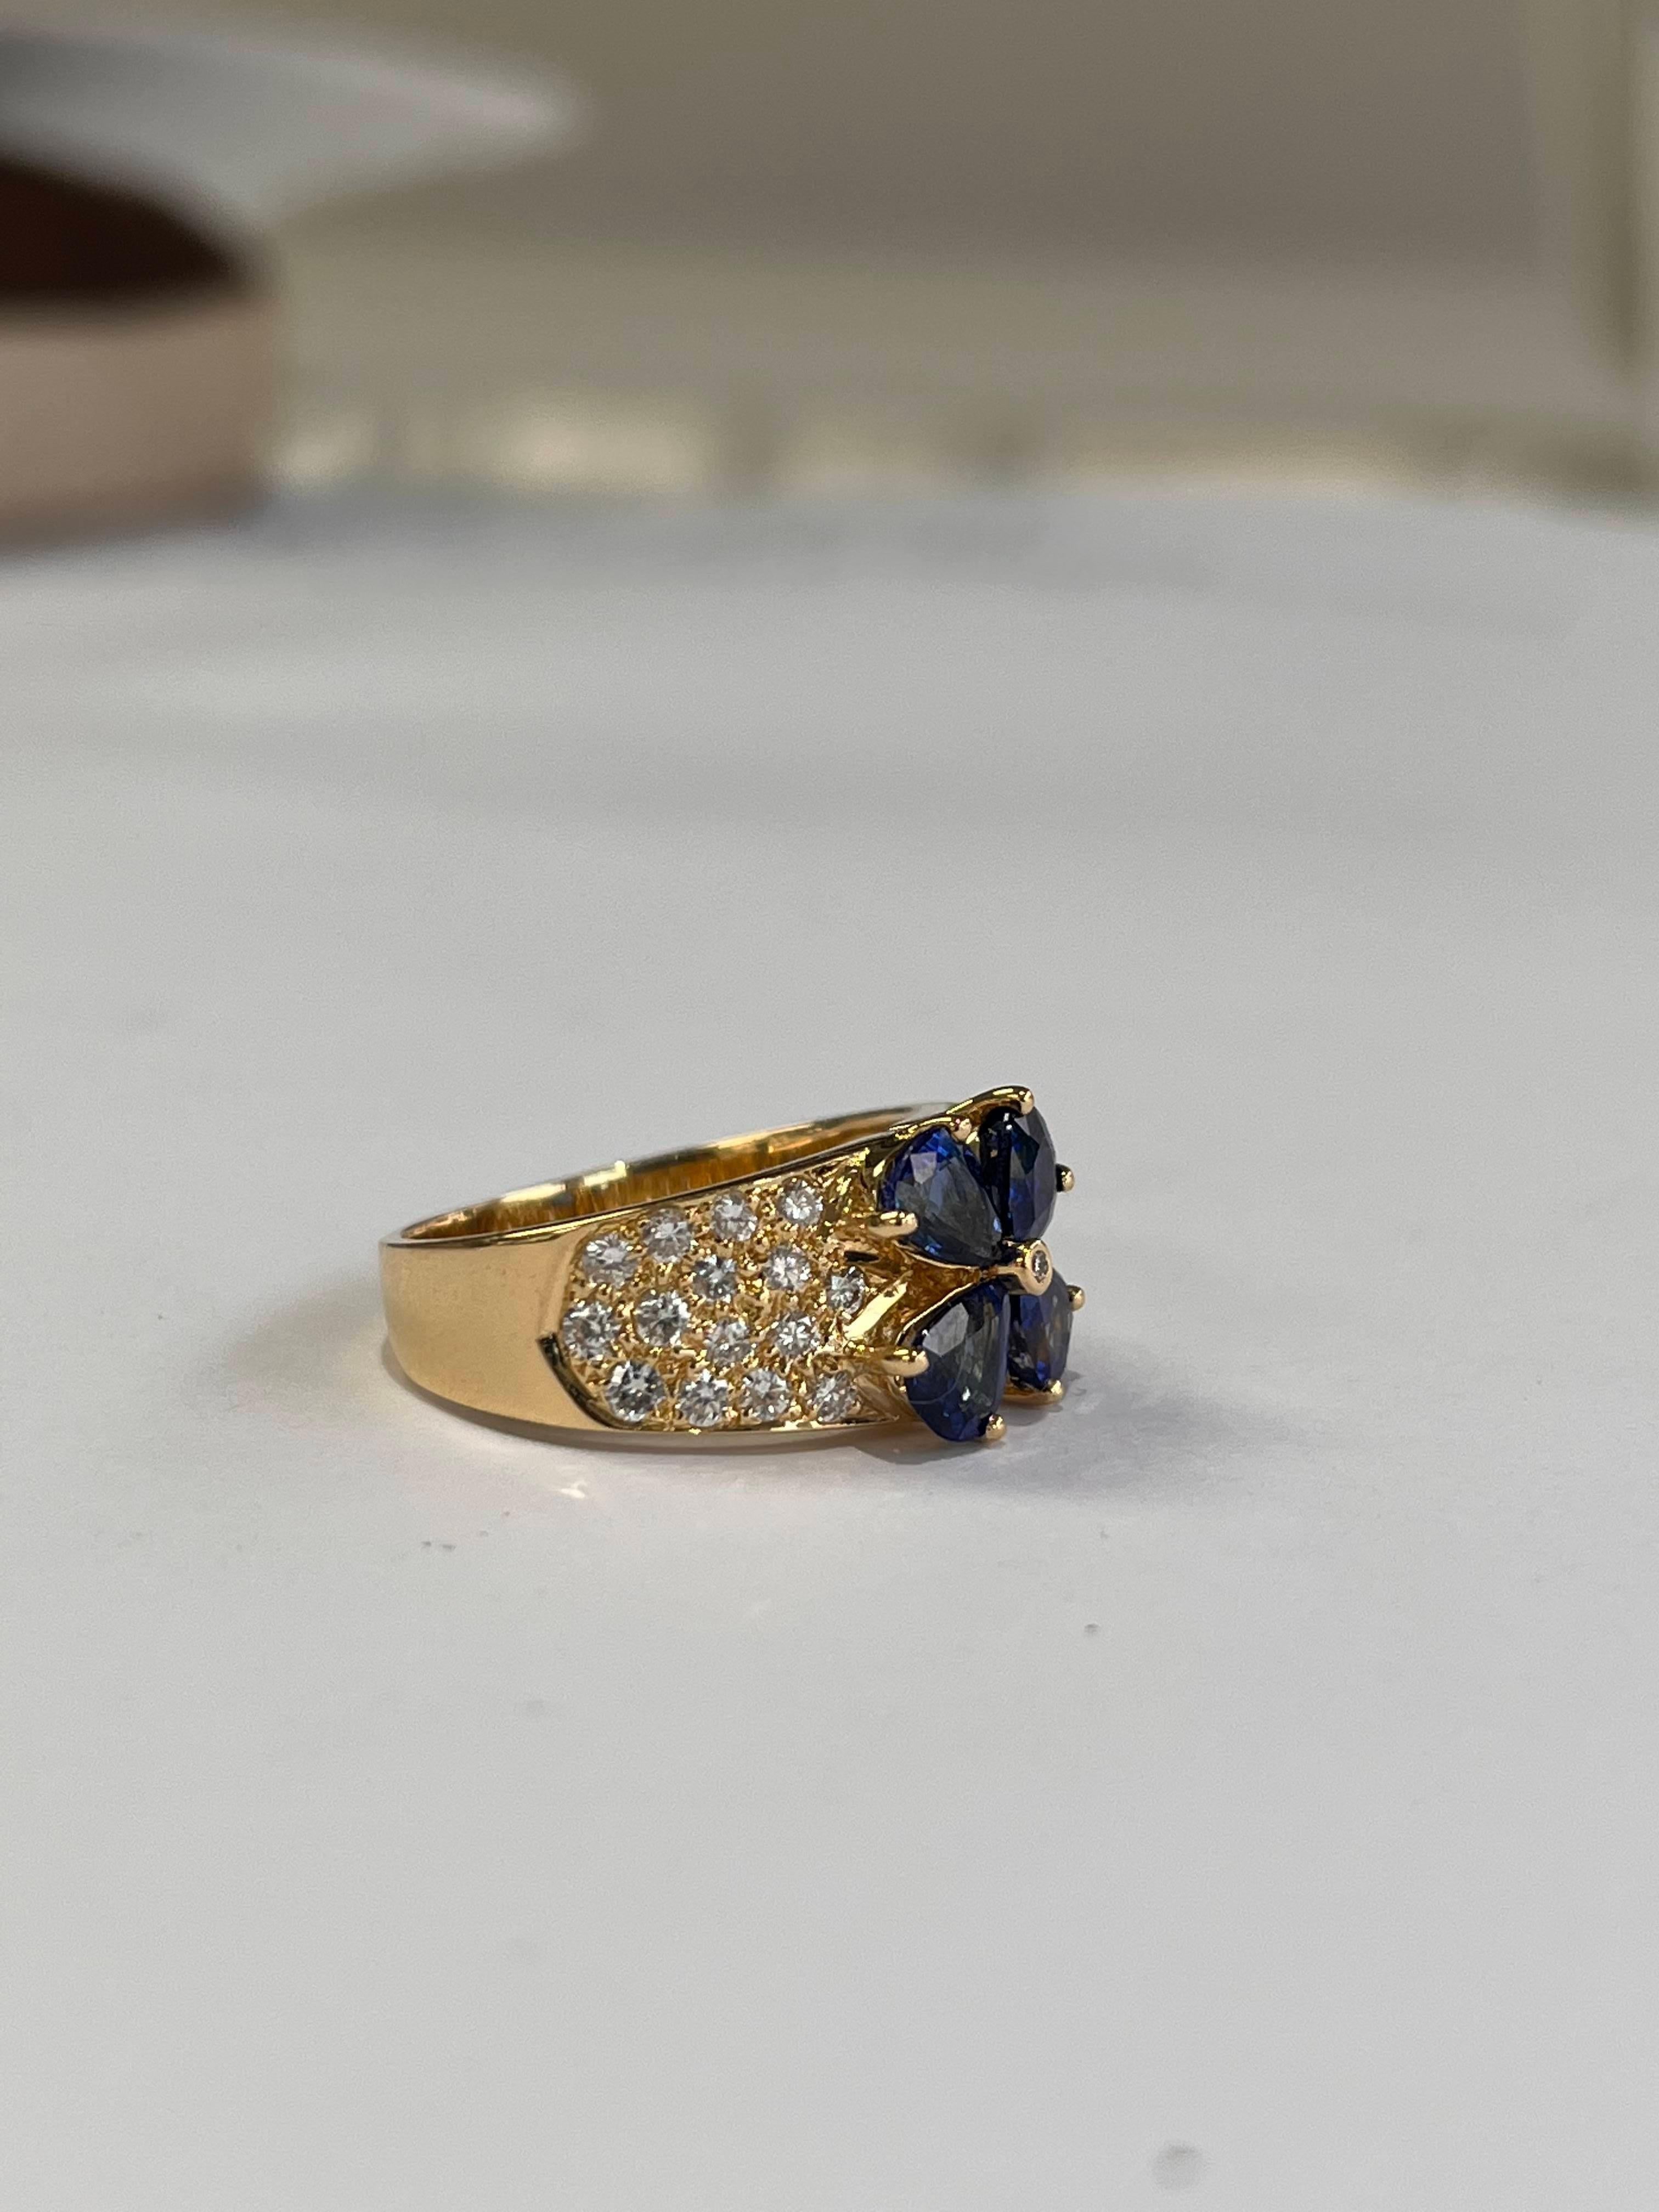 A very gorgeous and wearable Blue Sapphire Band/ Cocktail Ring set in 18K Yellow Gold & Diamonds. The weight of the Blue Sapphires is 1.81 carats. The Blue Sapphires are of Ceylon origin. The weight of the Diamonds is 0.68 carats. The dimensions of